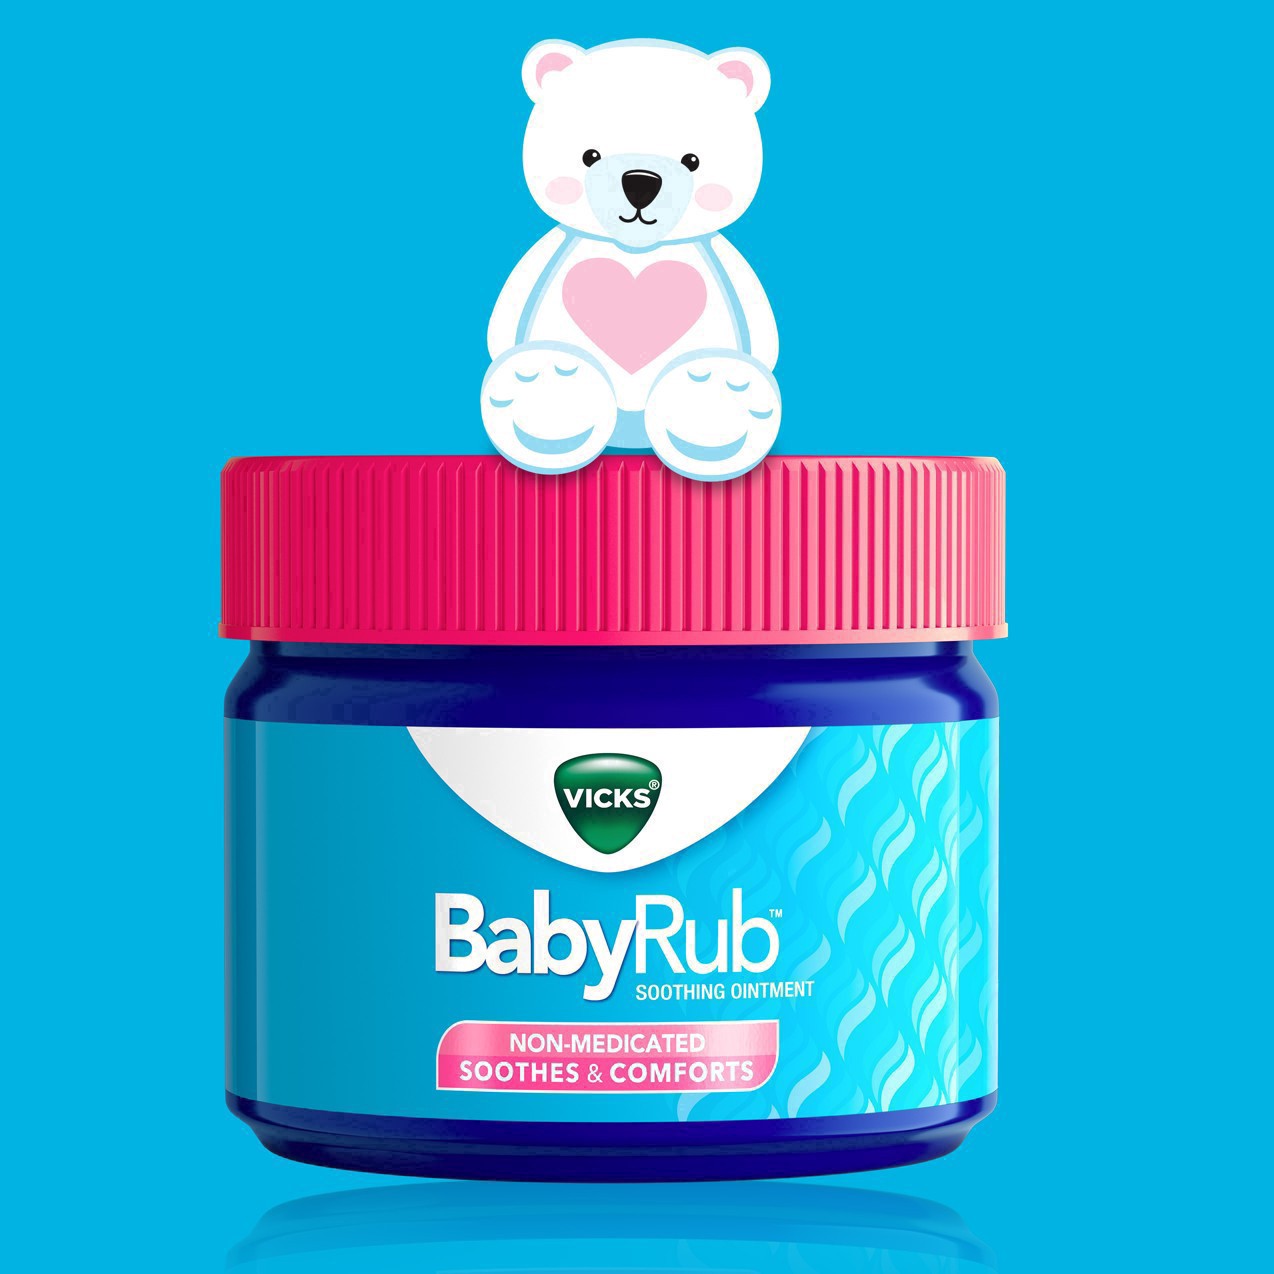 slide 31 of 78, Vicks BabyRub, Chest Rub Ointment with Soothing Aloe, Eucalyptus, Lavender, and Rosemary, from The Makers of VapoRub, 1.76 oz, 1.76 oz